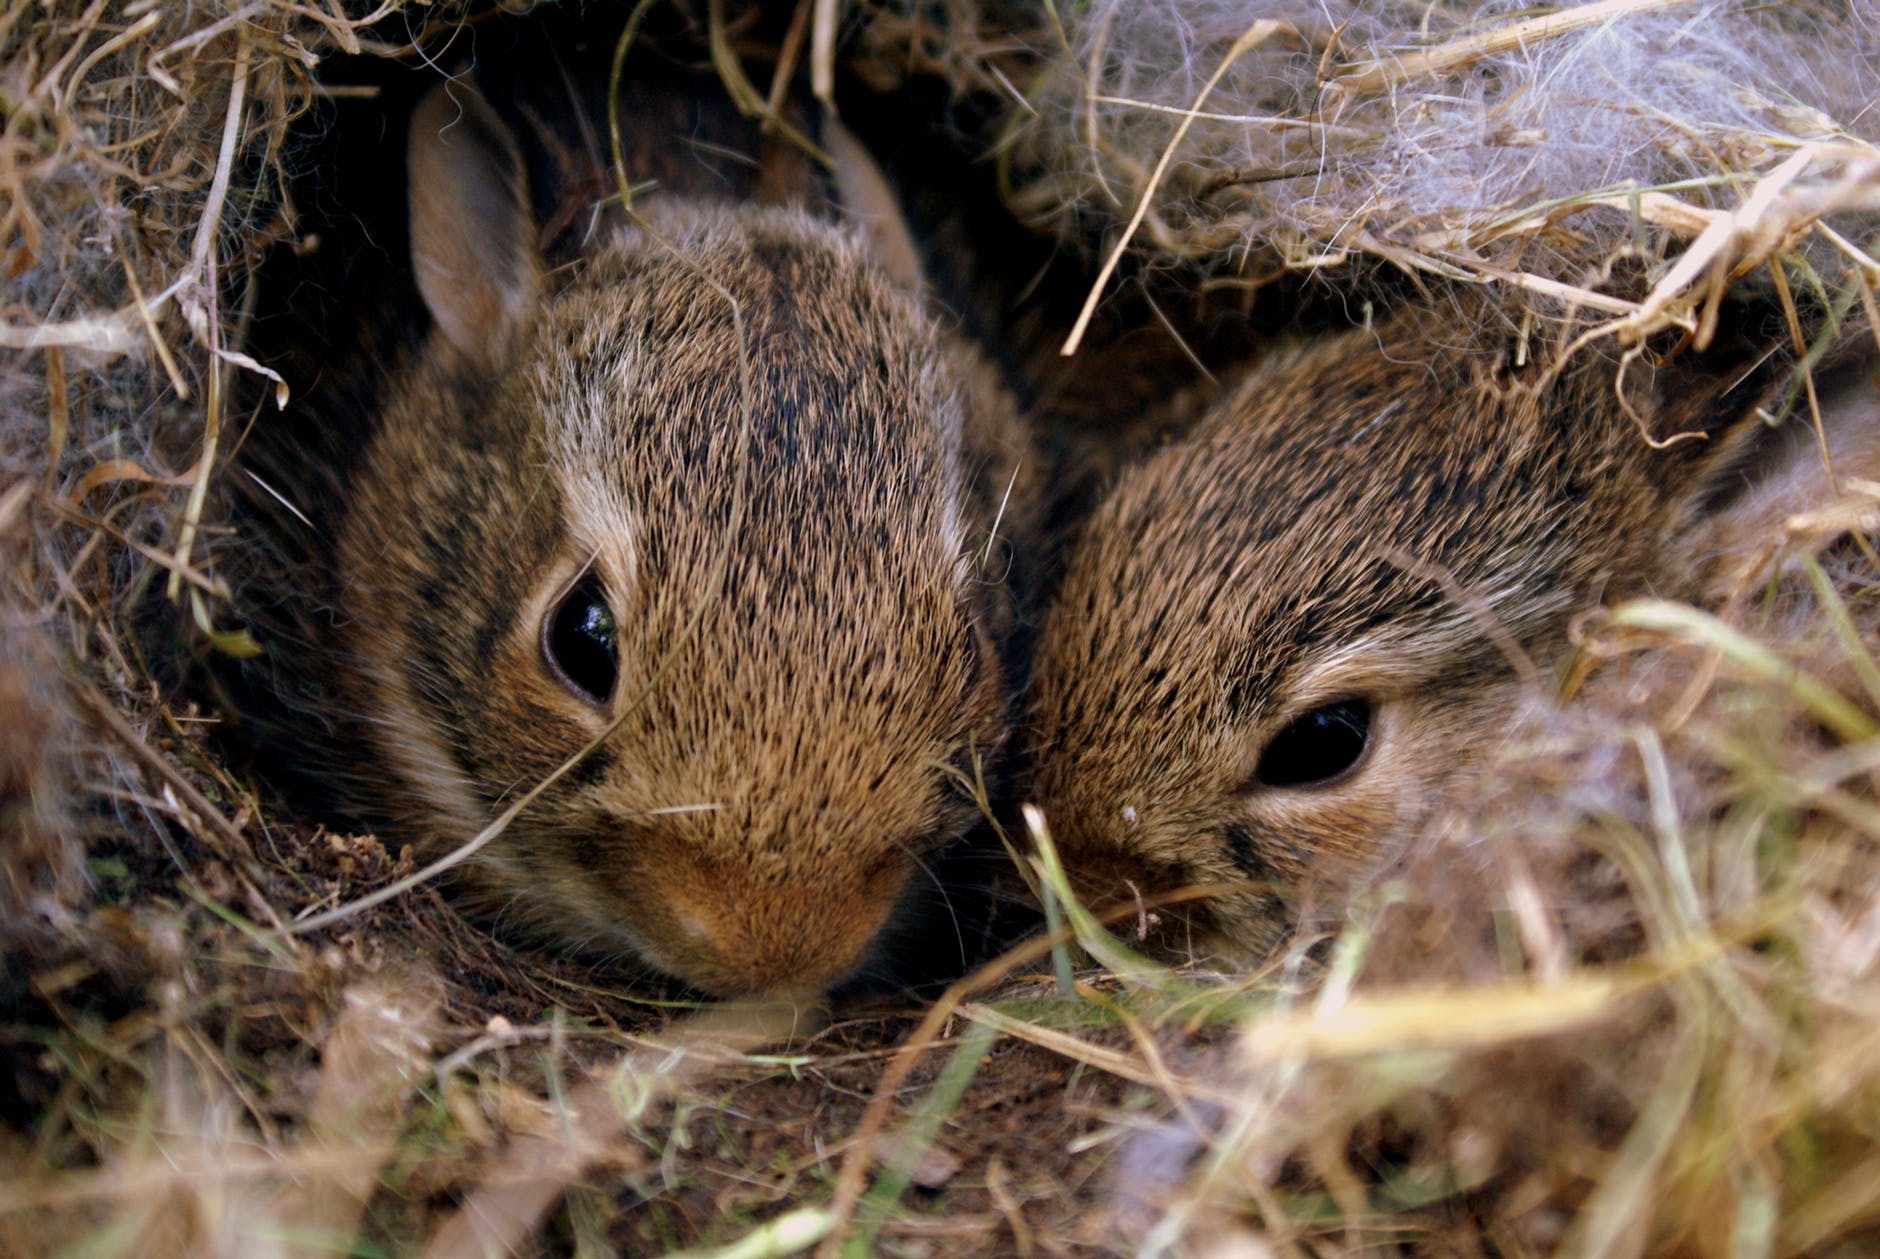 two brown rabbits